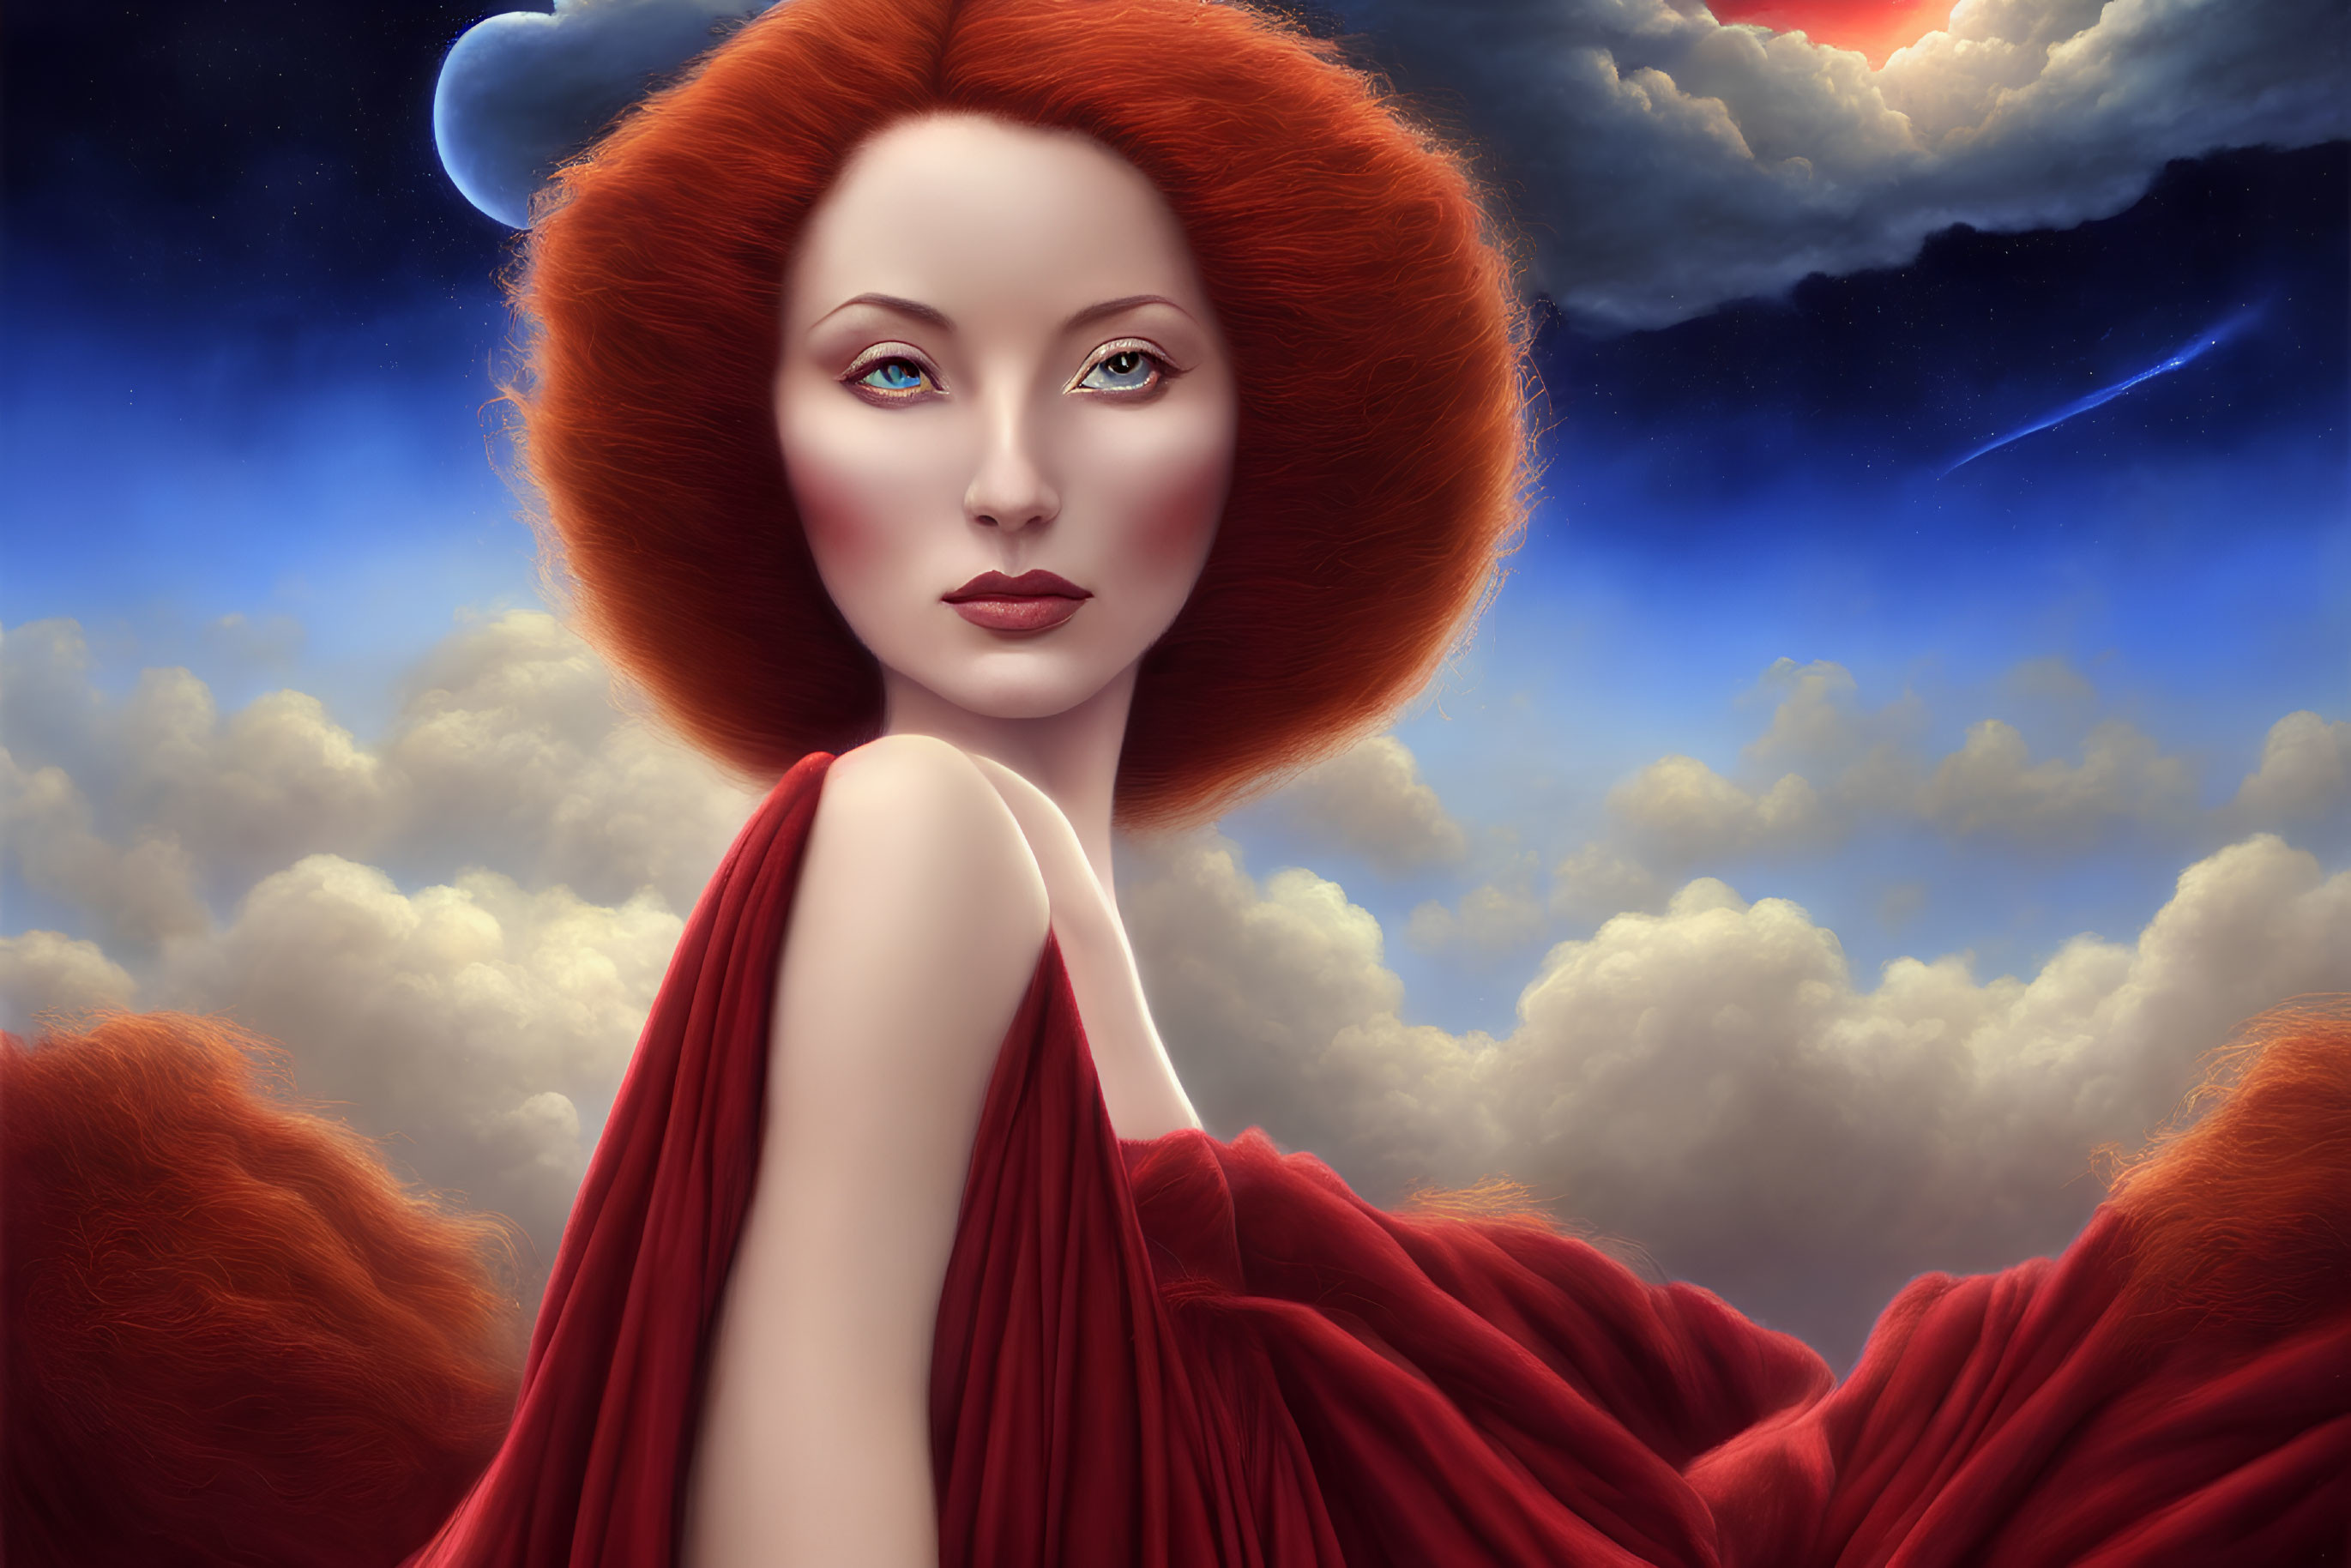 Digital artwork features woman with red hair and cloak under vibrant sky with comet.